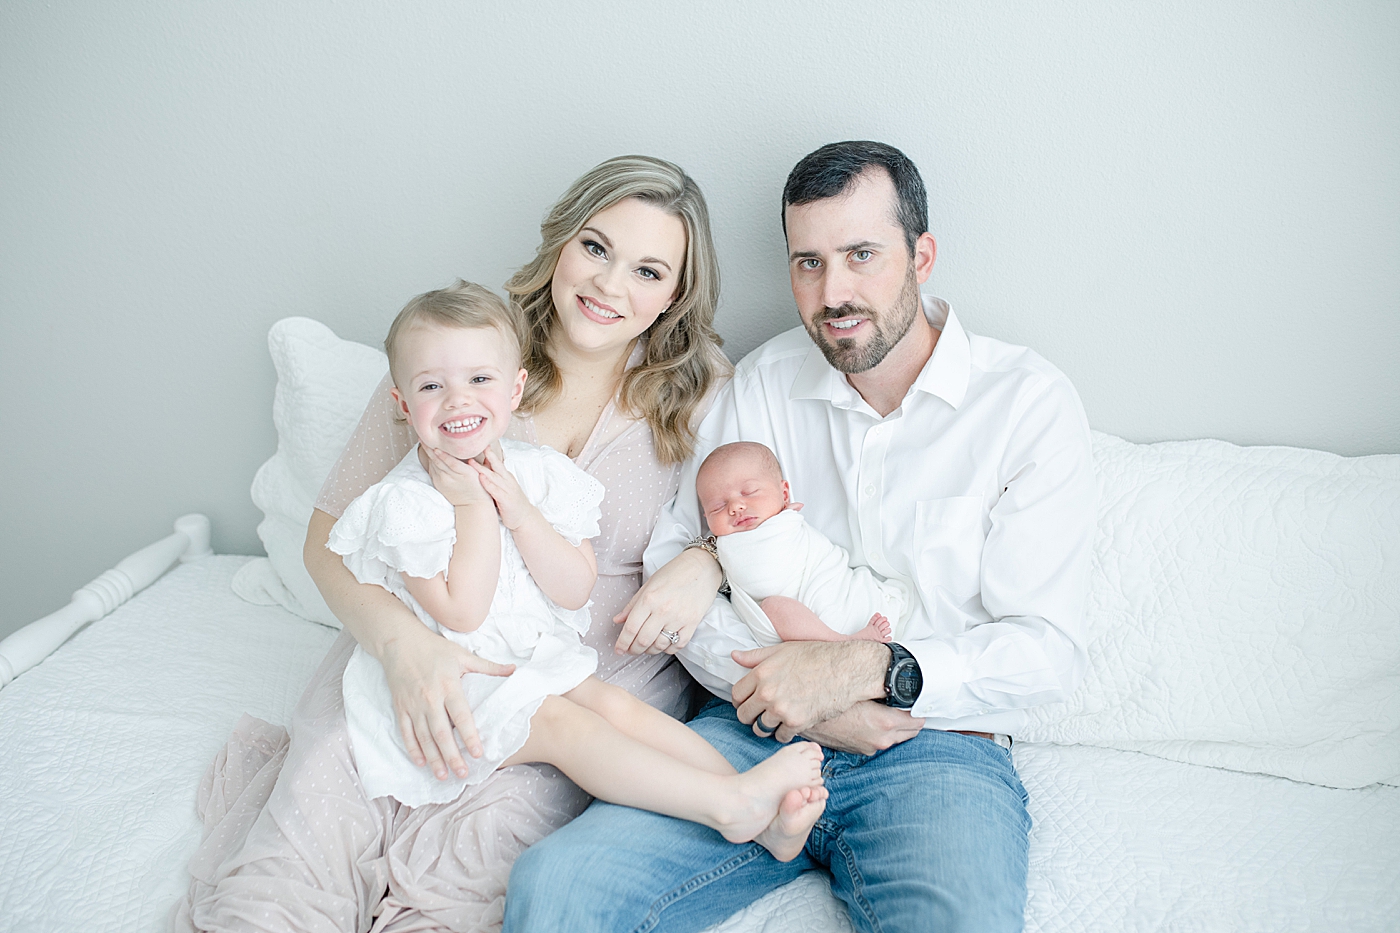 Family and sibling photos on bed during newborn session. Sweet image by Little Sunshine Photography.